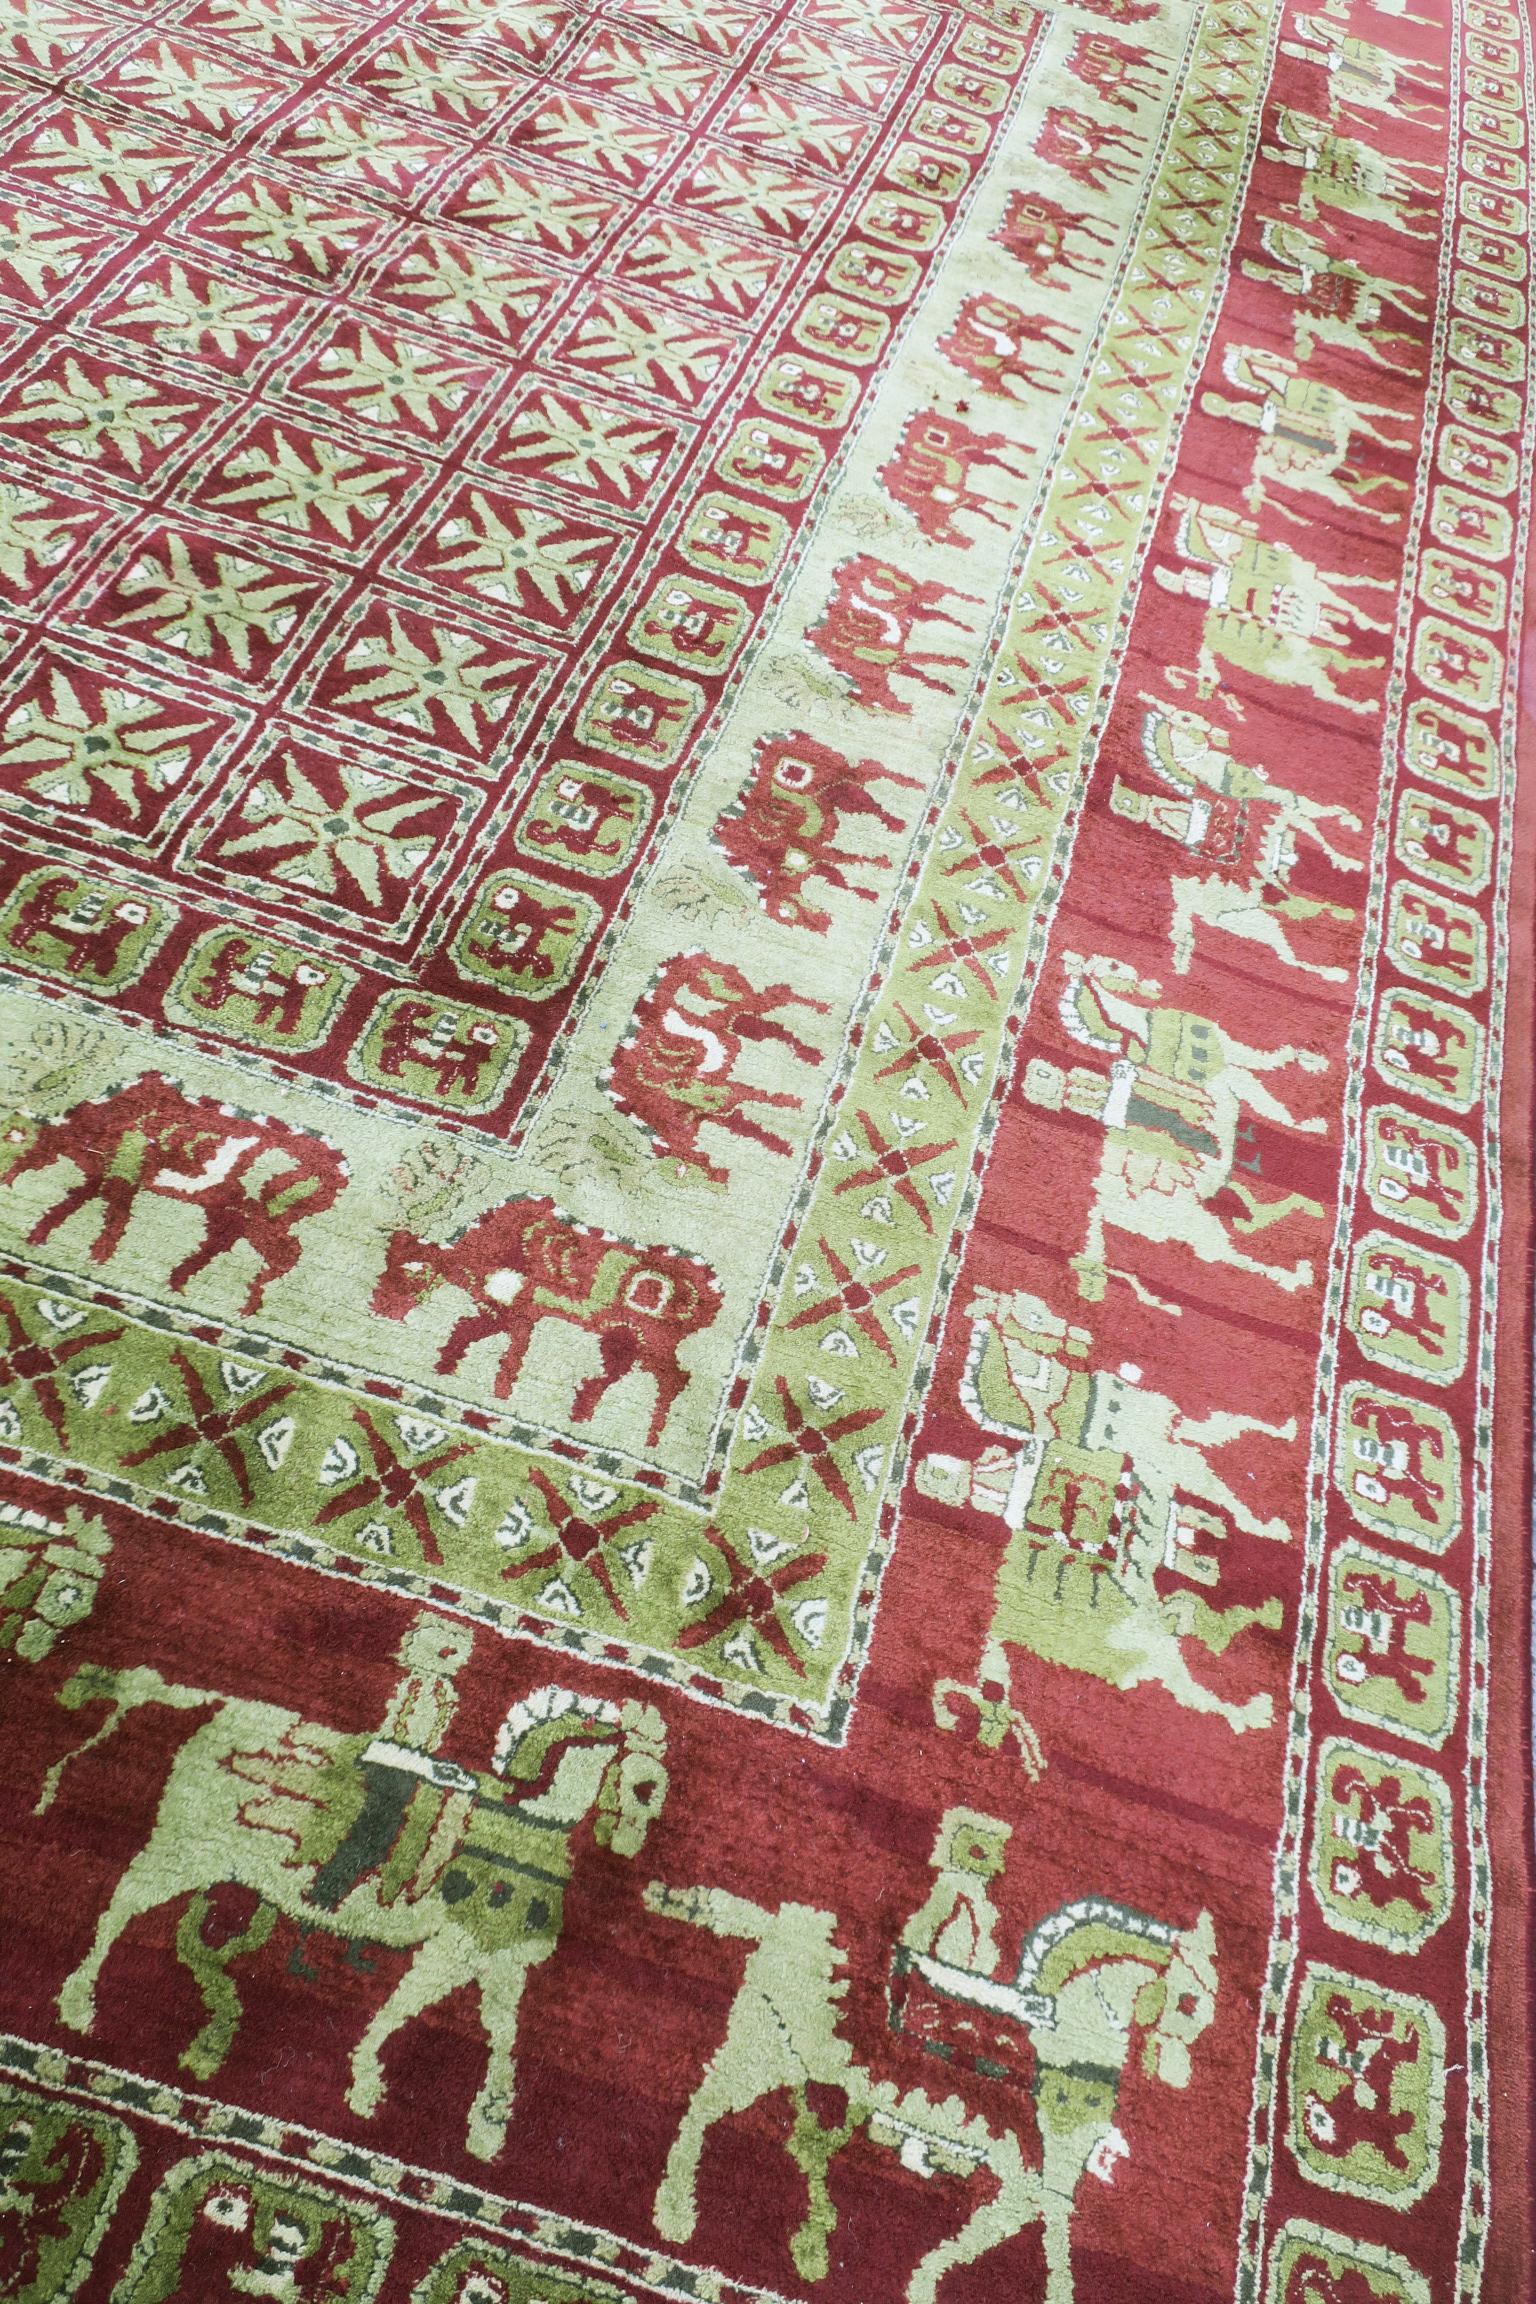 German European Hooked Rug, Copy of Pazyryk the Oldest Carpet in the World For Sale